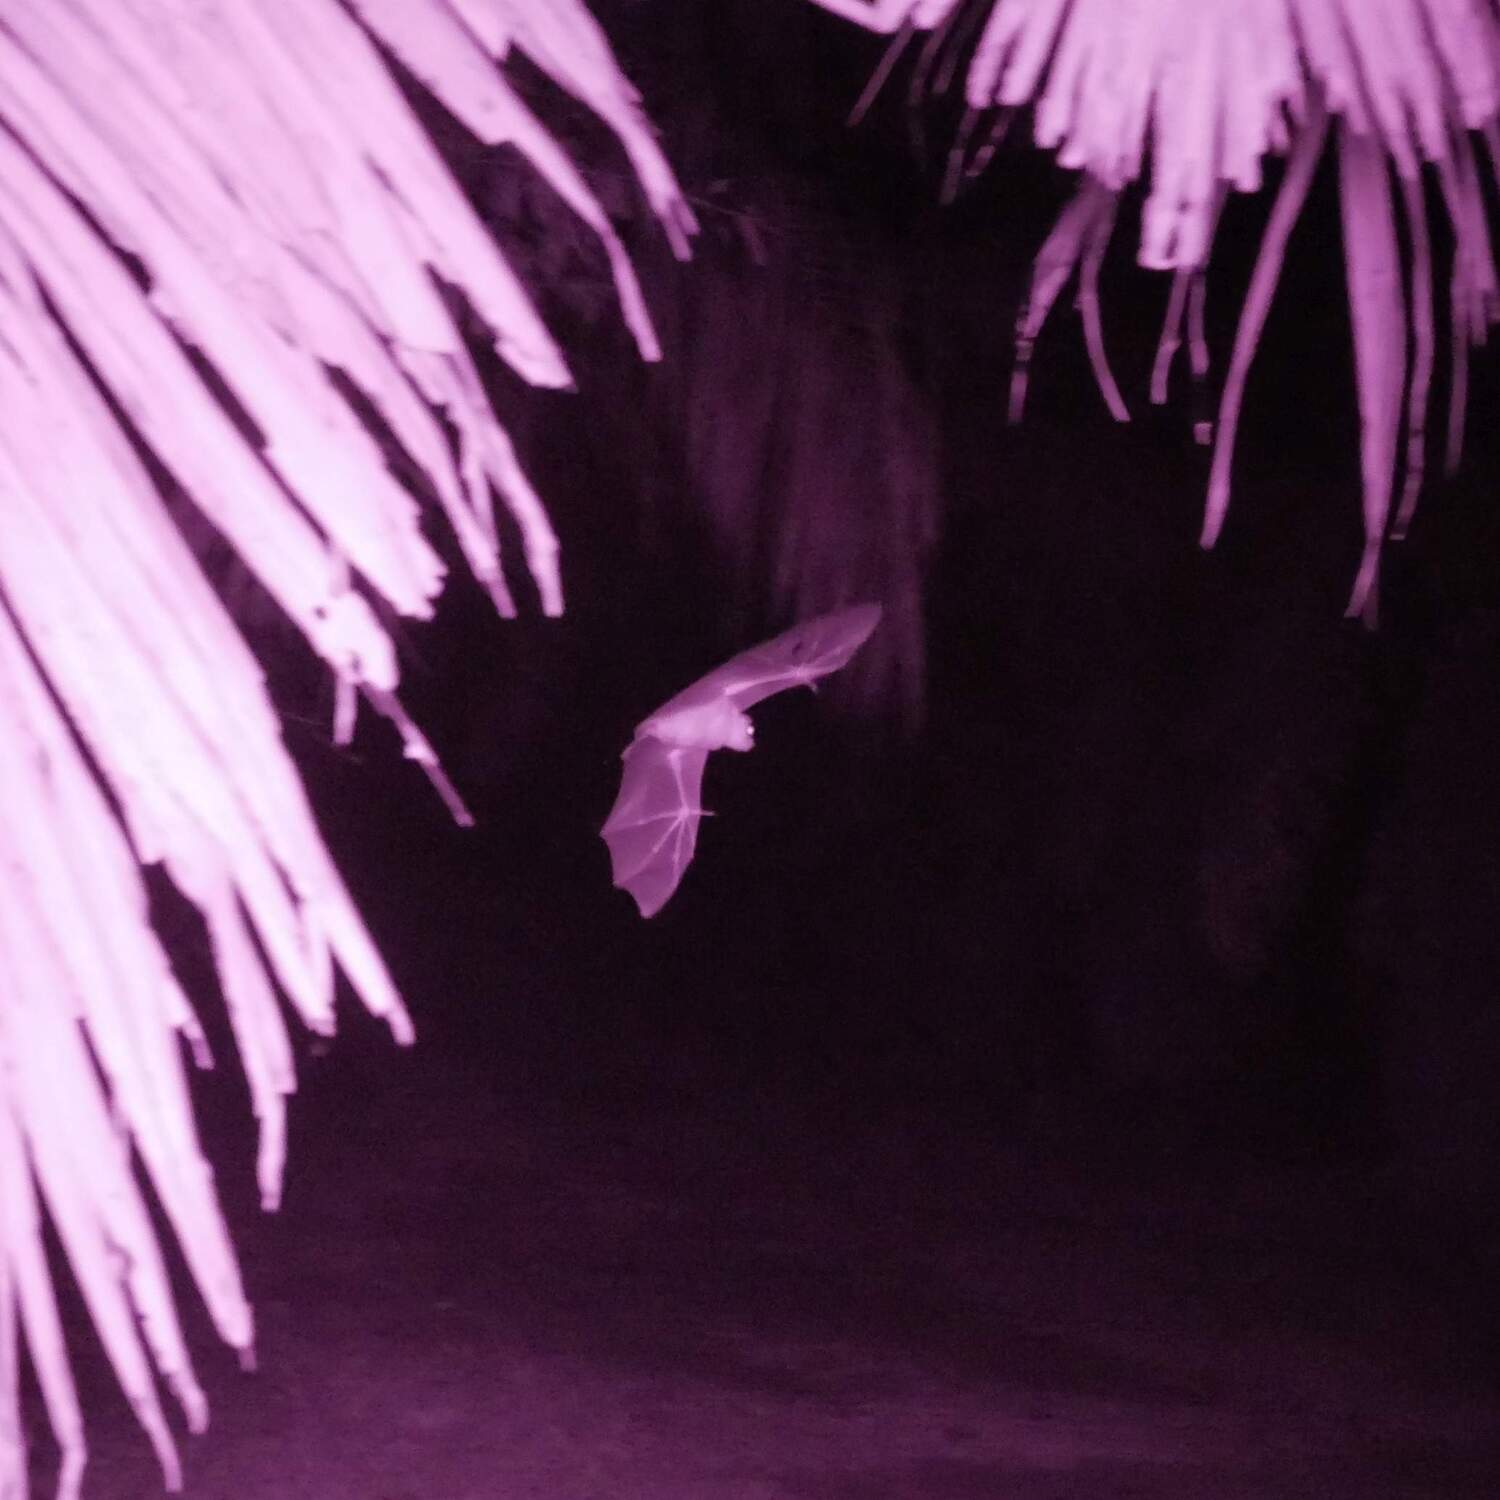 Researchers found a new method to count, detect and identify bats like this lesser short-nosed fruit bat (Cynopterus brachyotis) passing through an oil palm plantation - near-infrared photograph